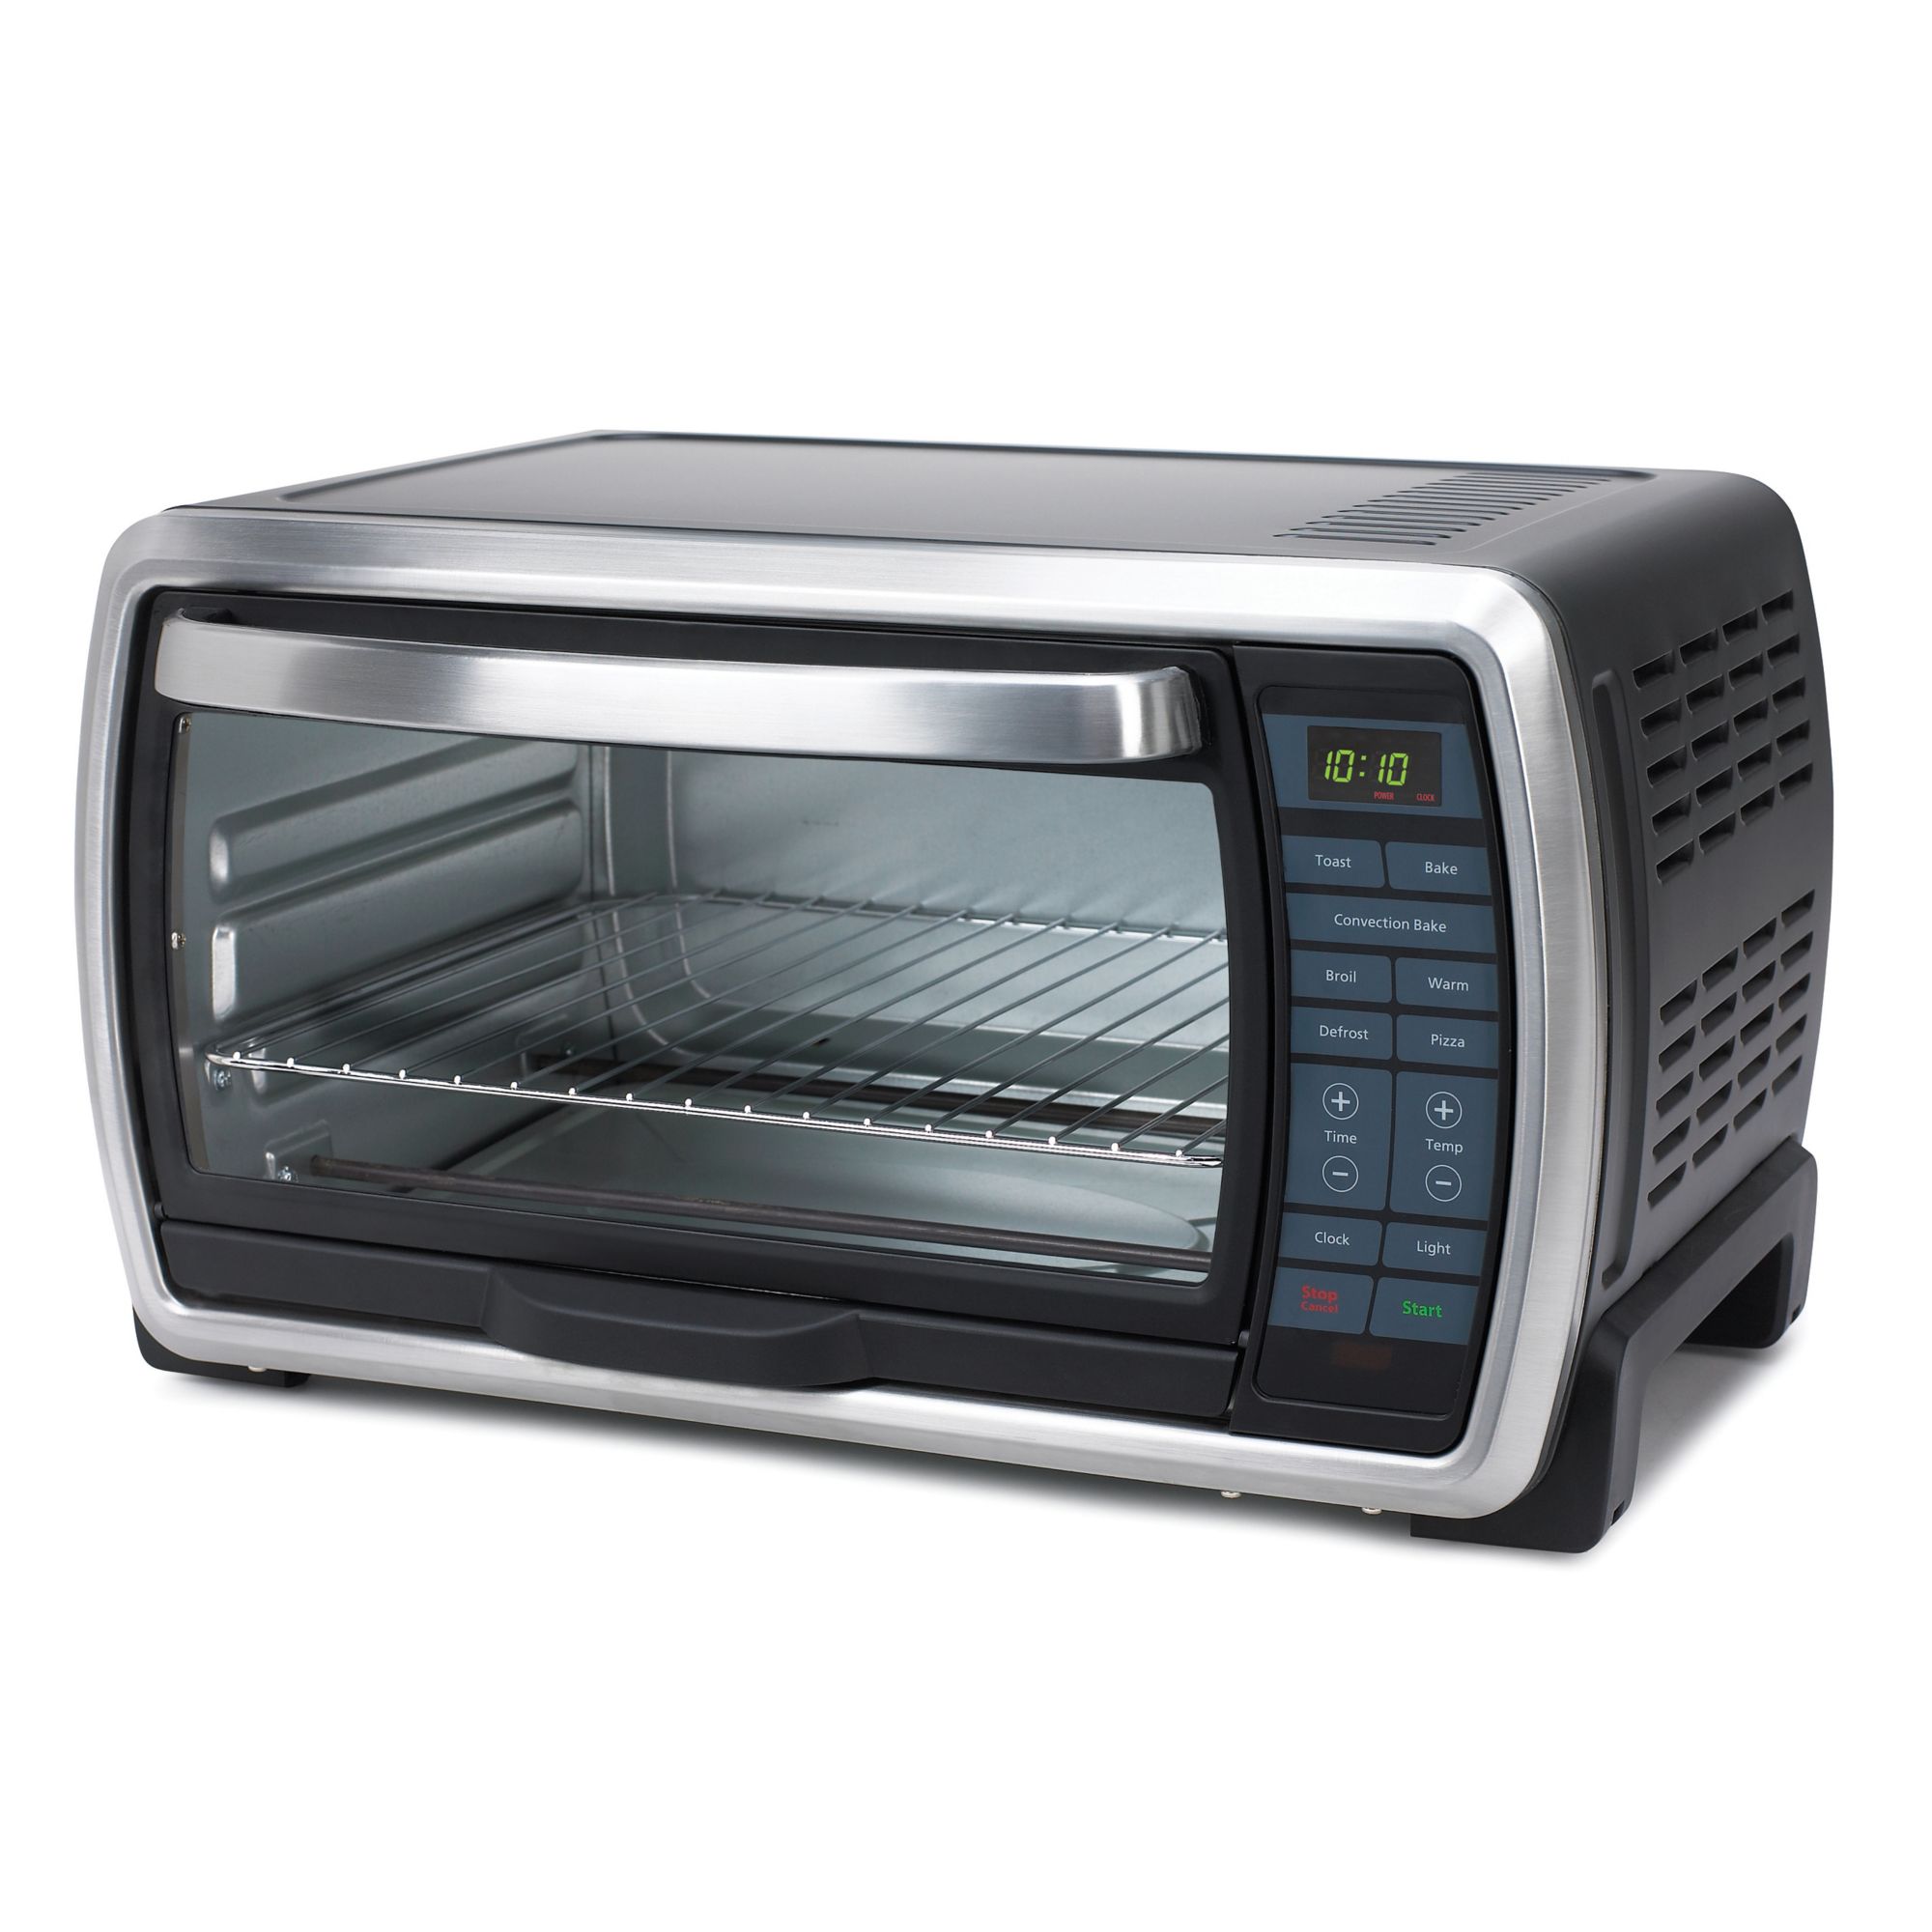 Oster 1500W Digital Countertop Convection Oven - appliances - by owner -  sale - craigslist